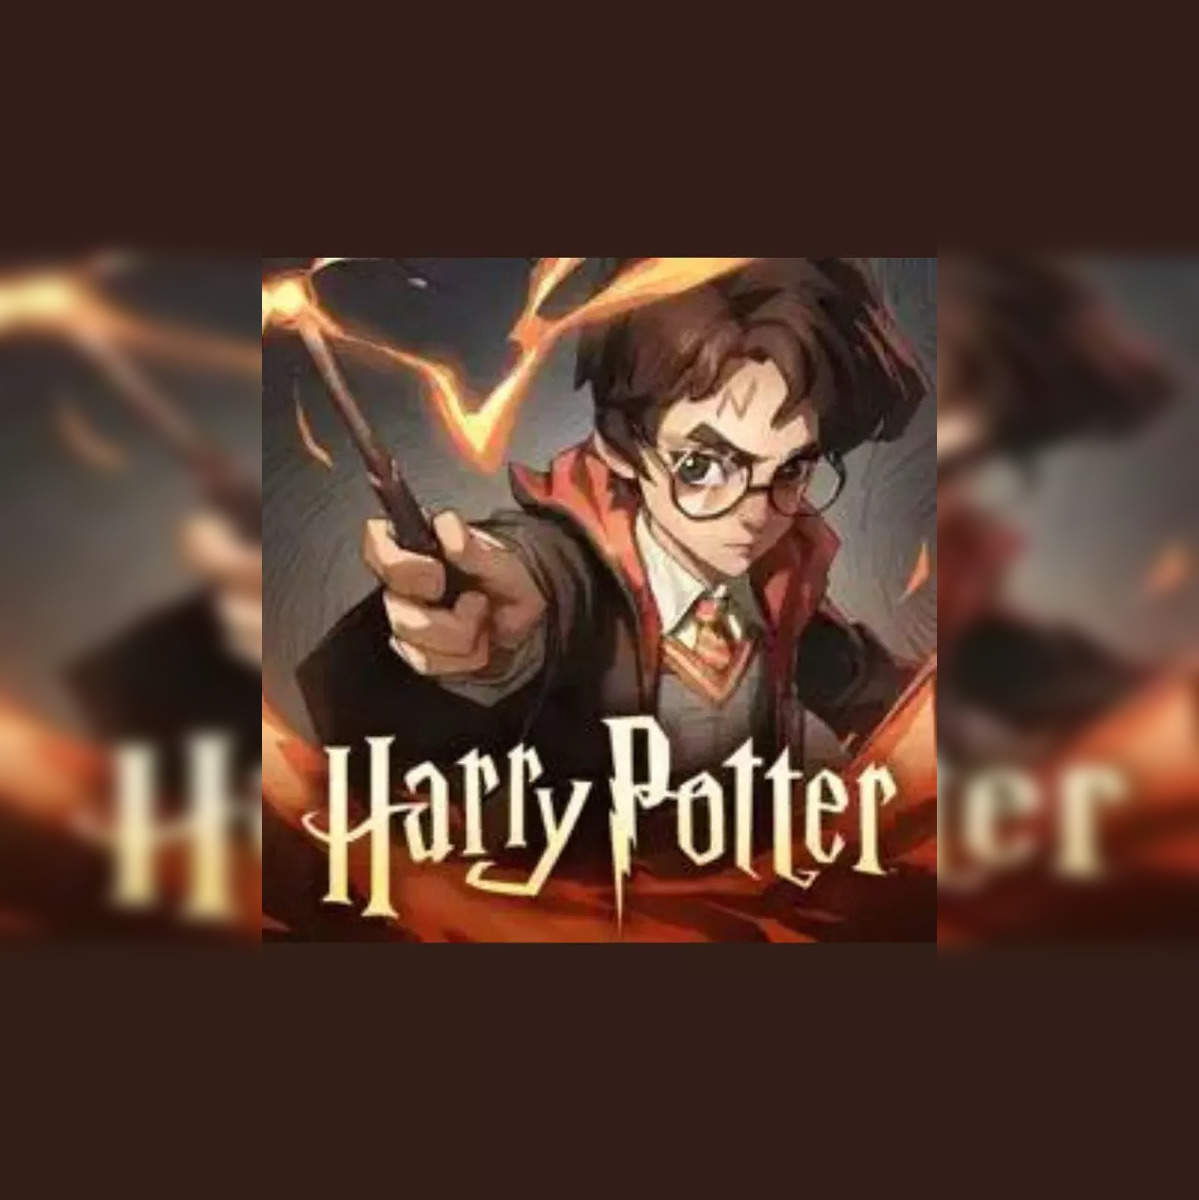 Harry Potter Magic Awakened: Currently available servers - The